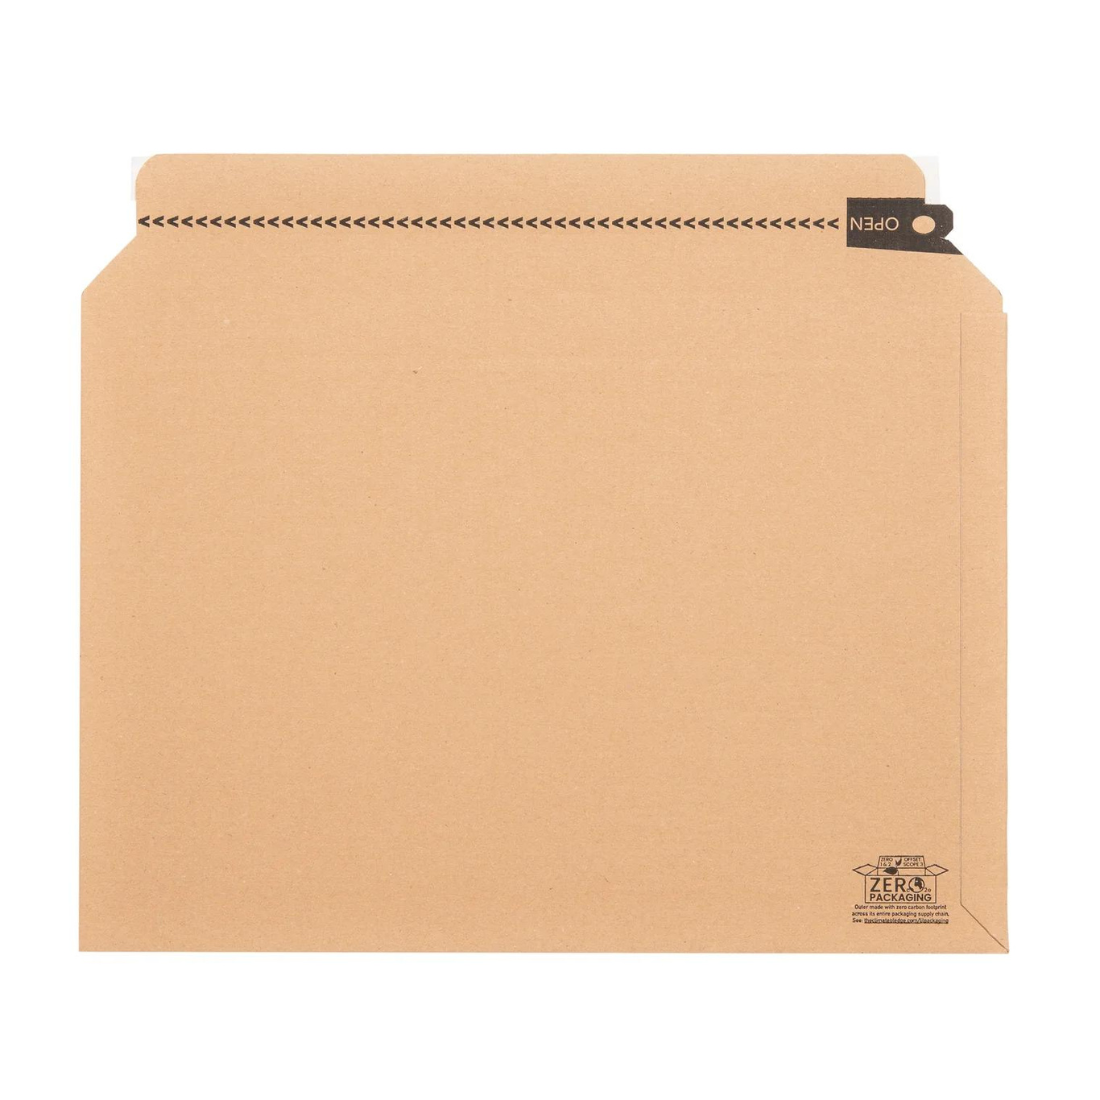 A2 (334x234mm) A4 size mailer - Fits comic books, DVDs and much more (PACK OF 50)